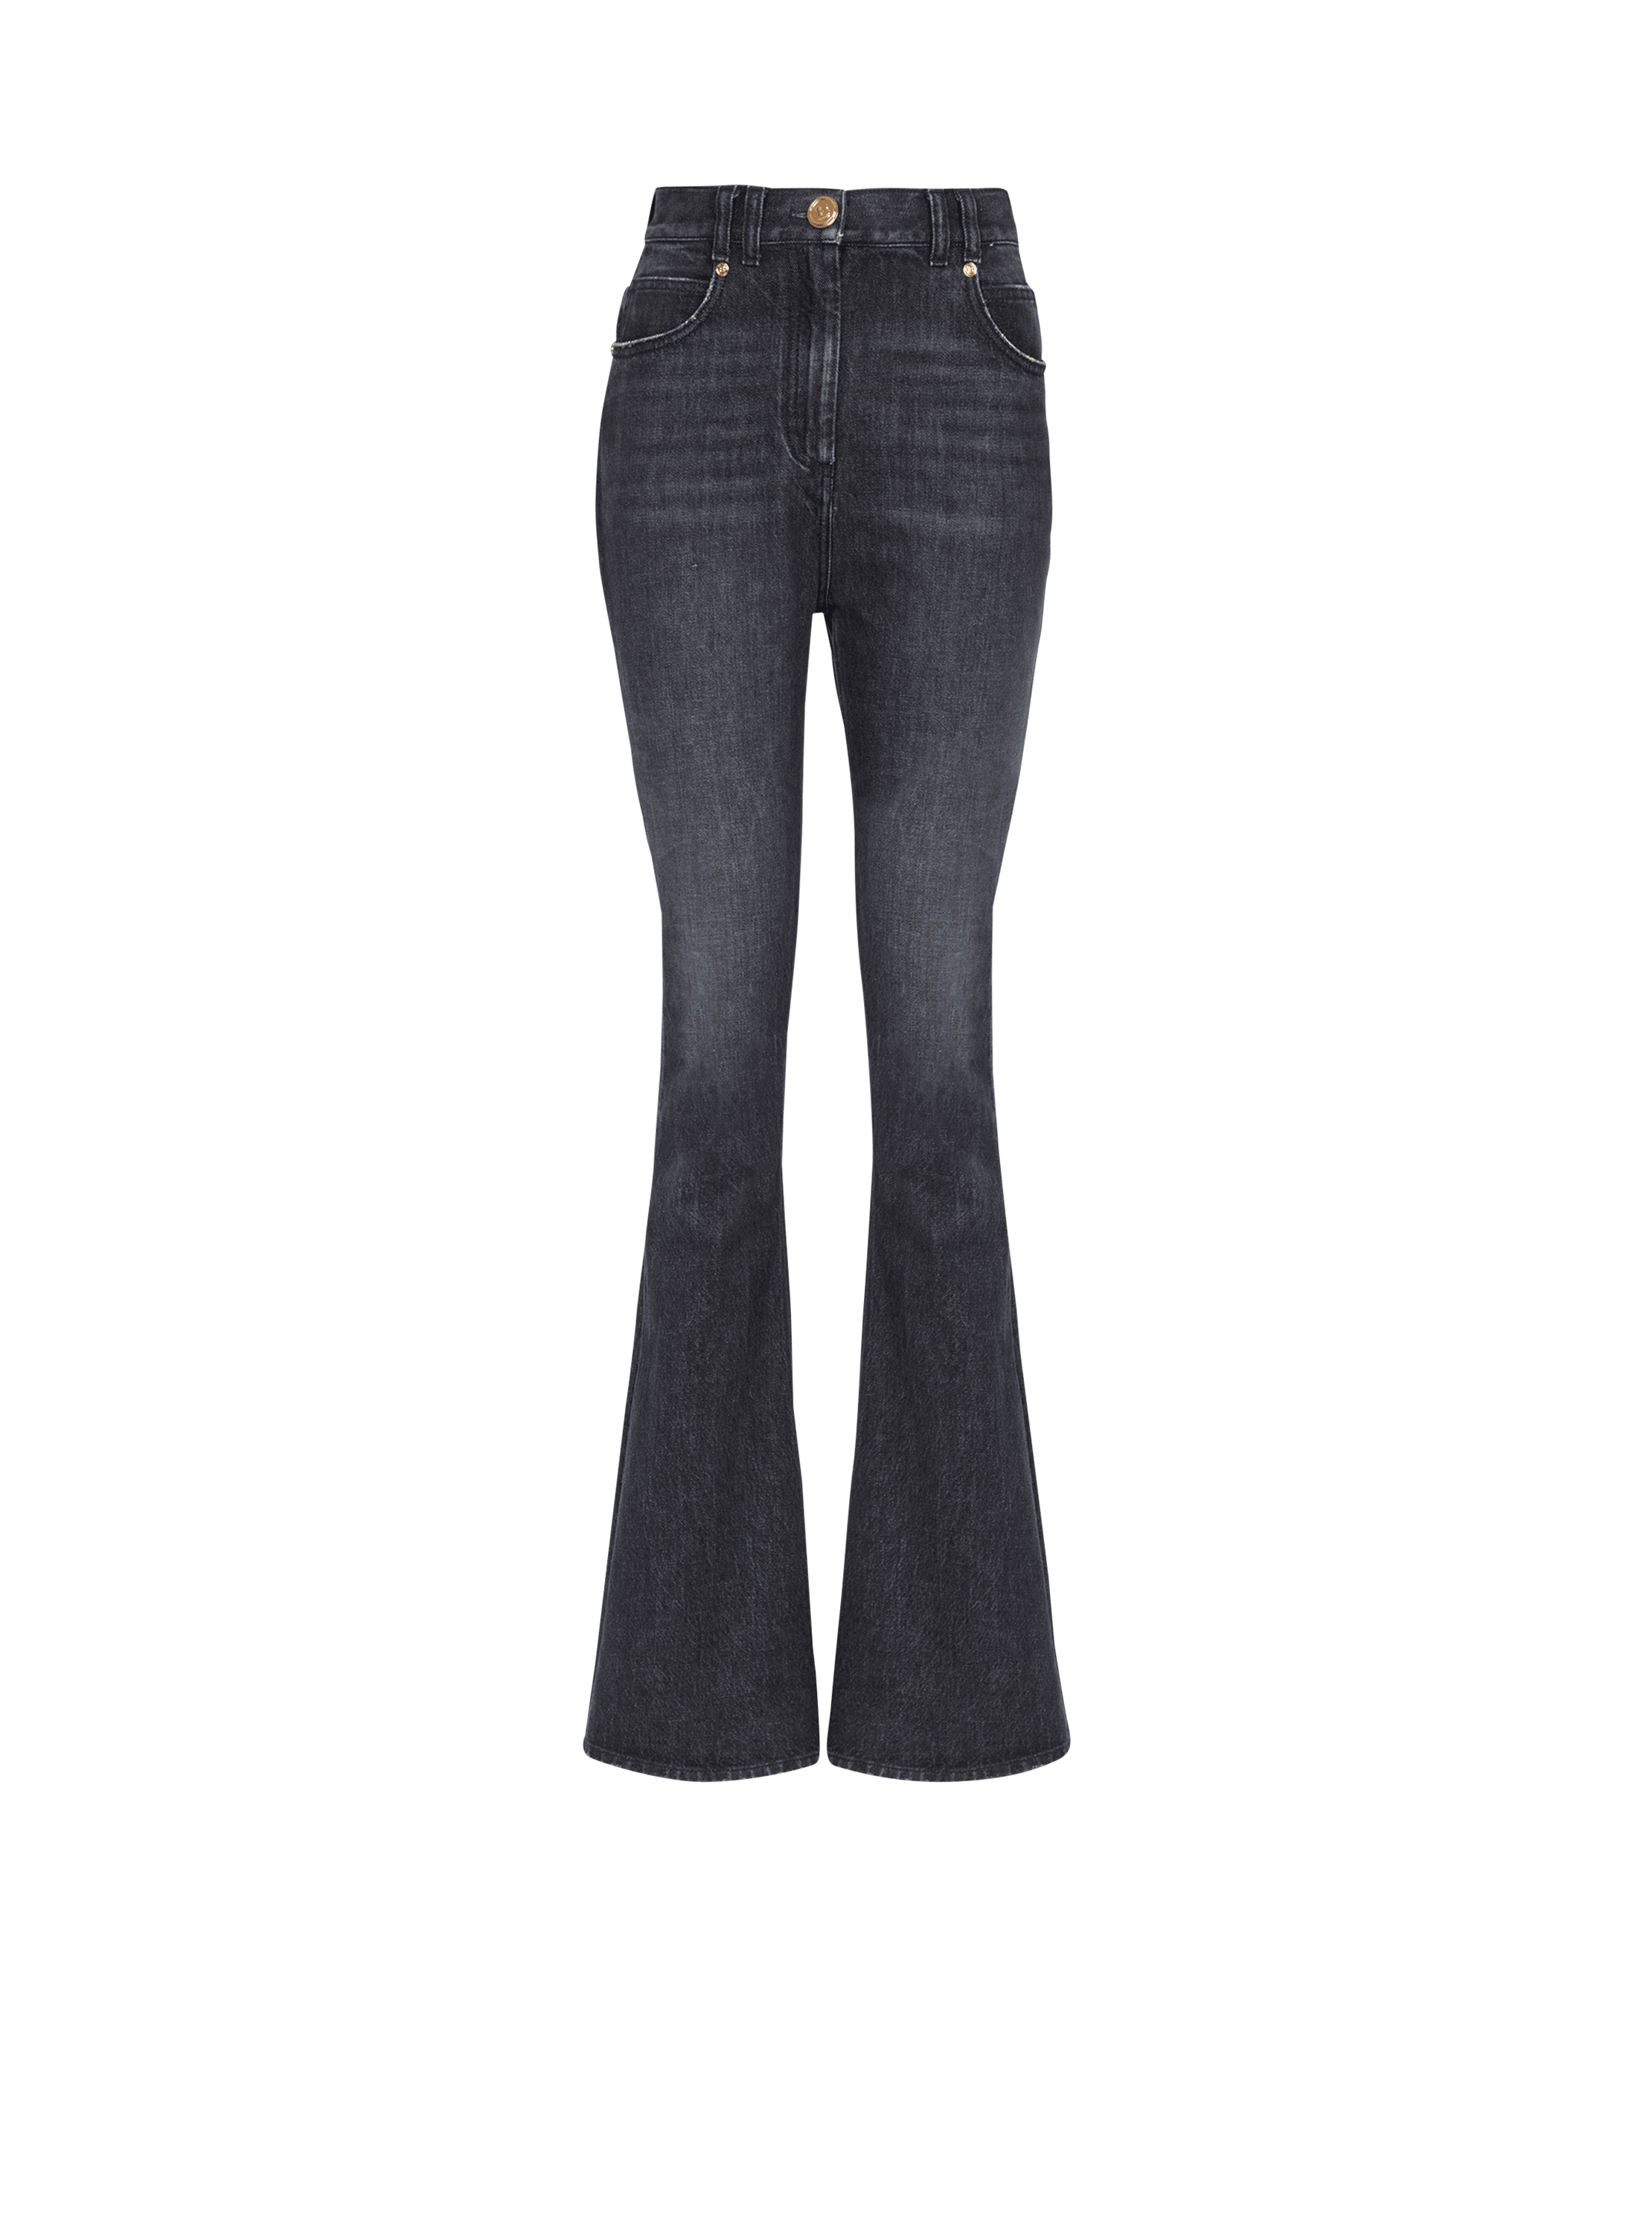 Eco-designed bootcut jeans